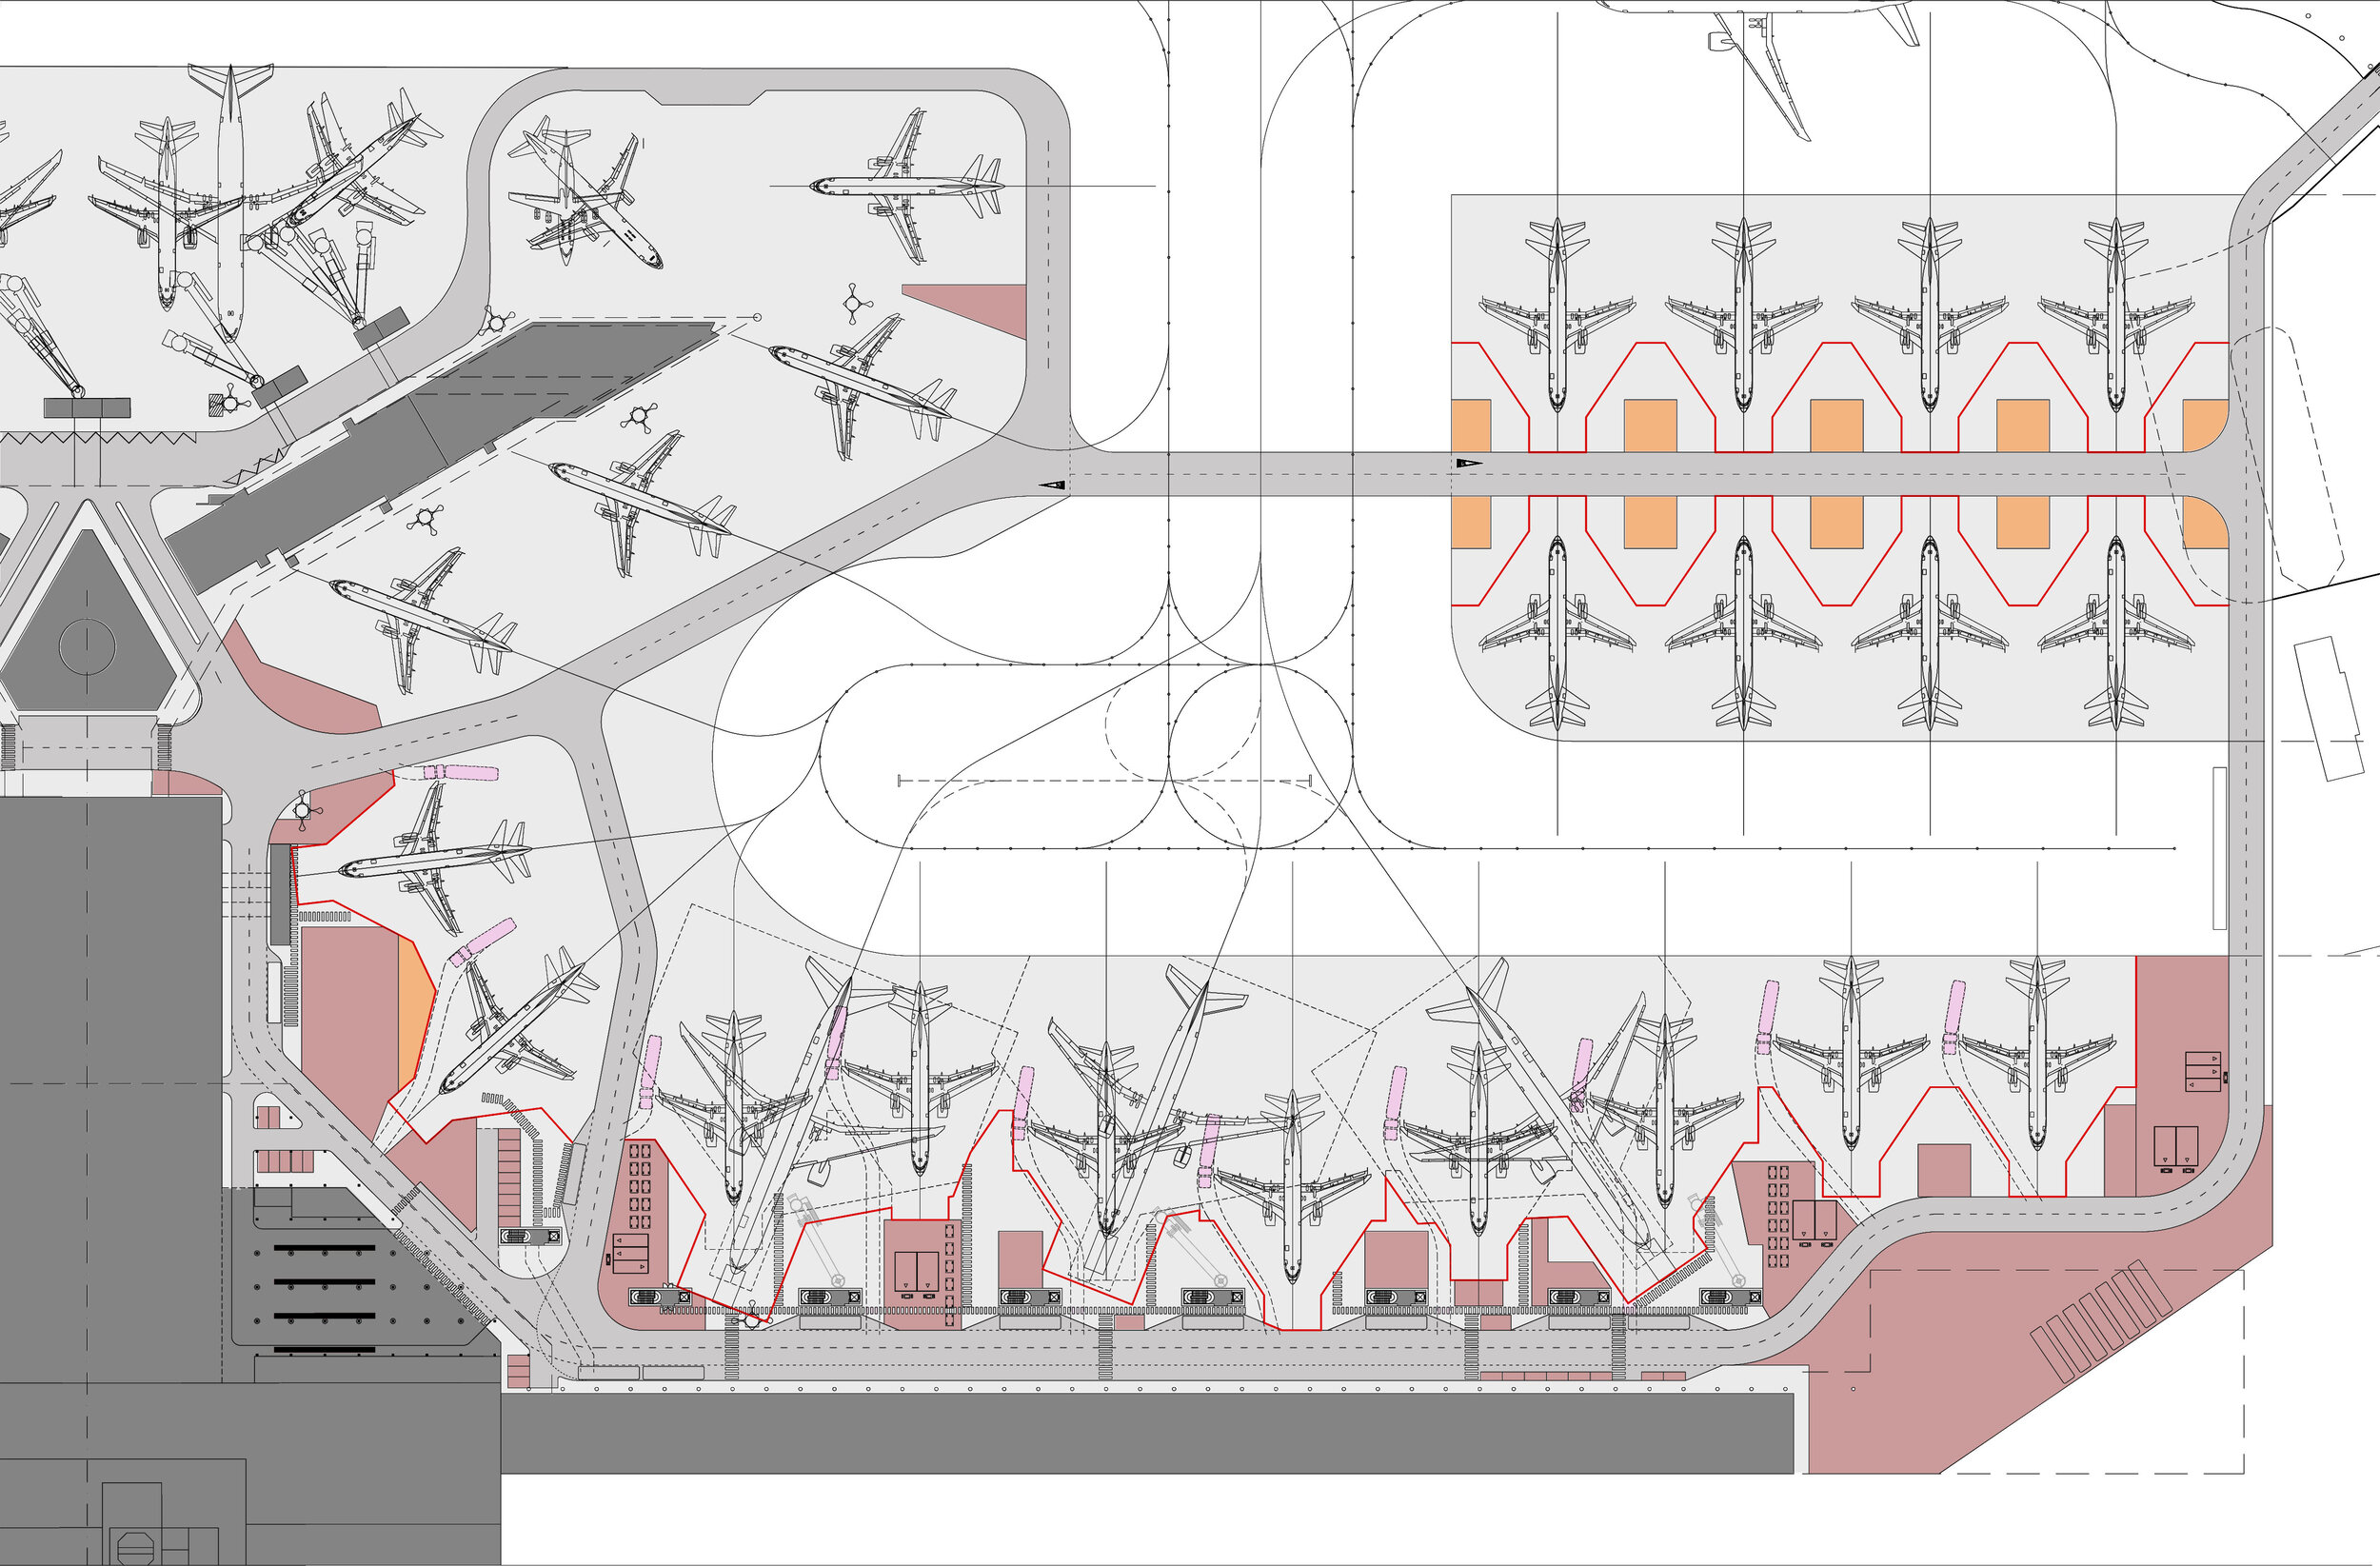 Floorplan of the airside after the extension at the EuroAirport